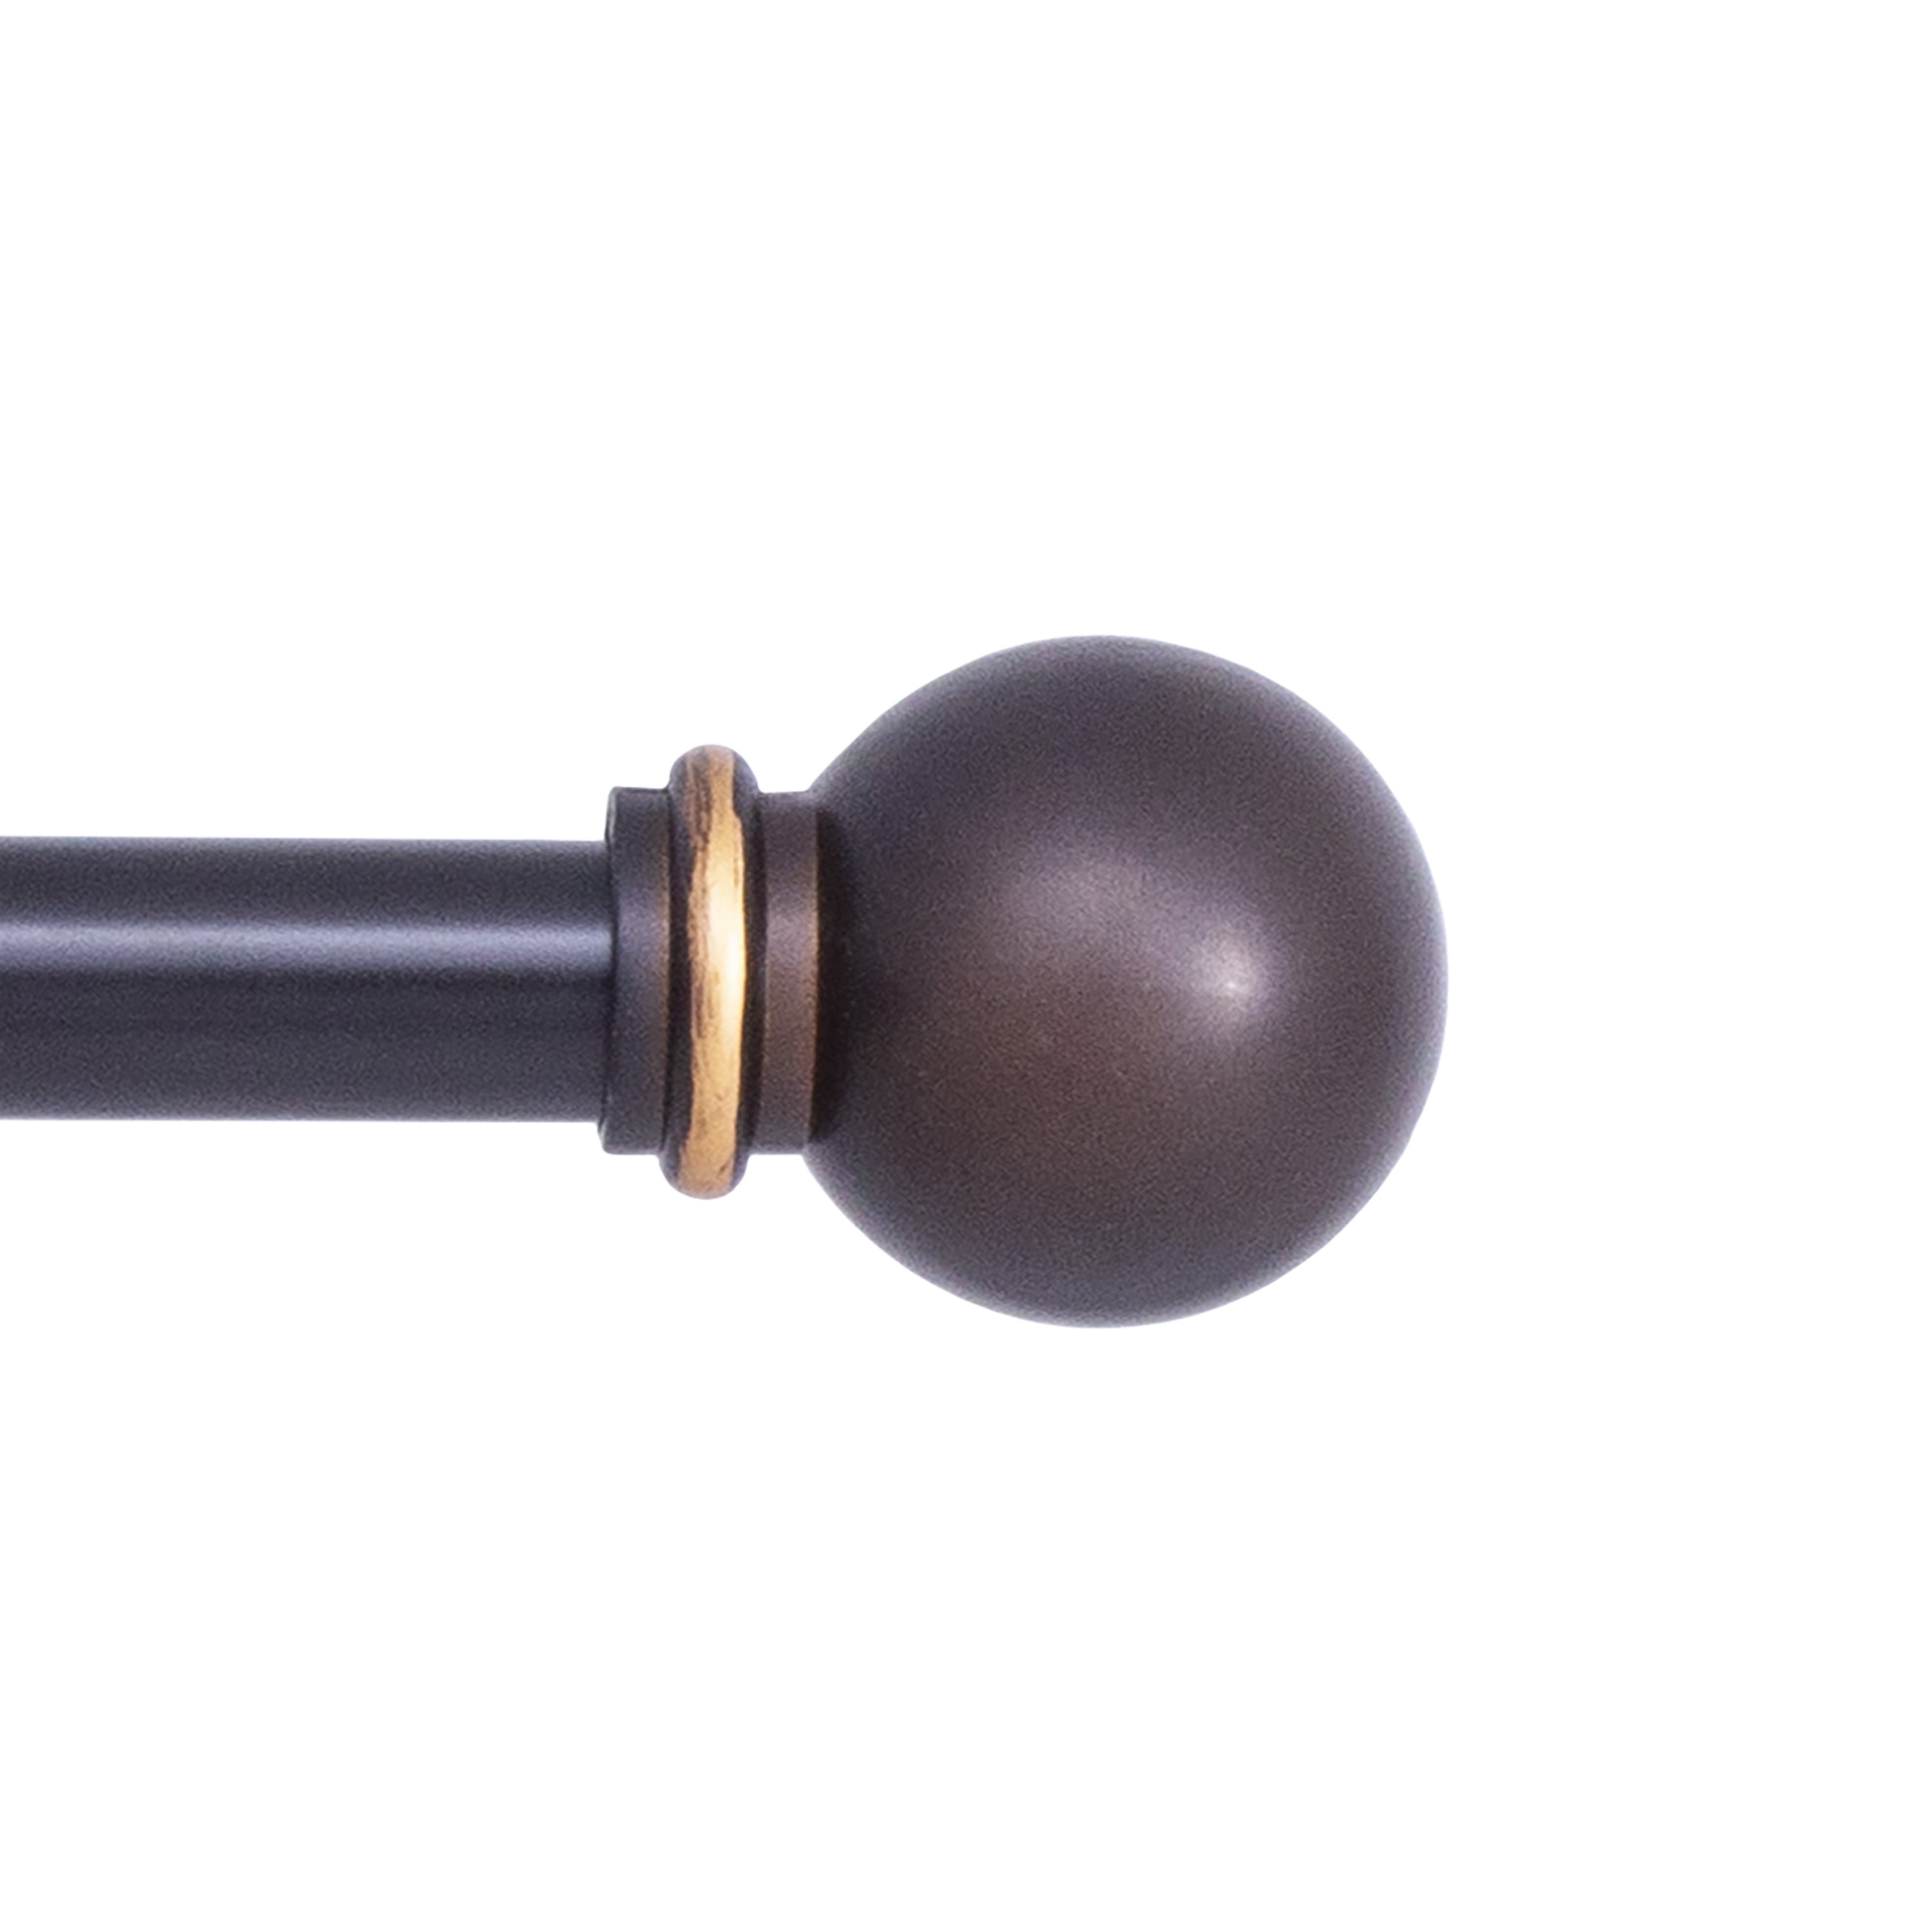 Kenney Chelsea Ball Window Curtain Rod Black 48 to 86-Inch 